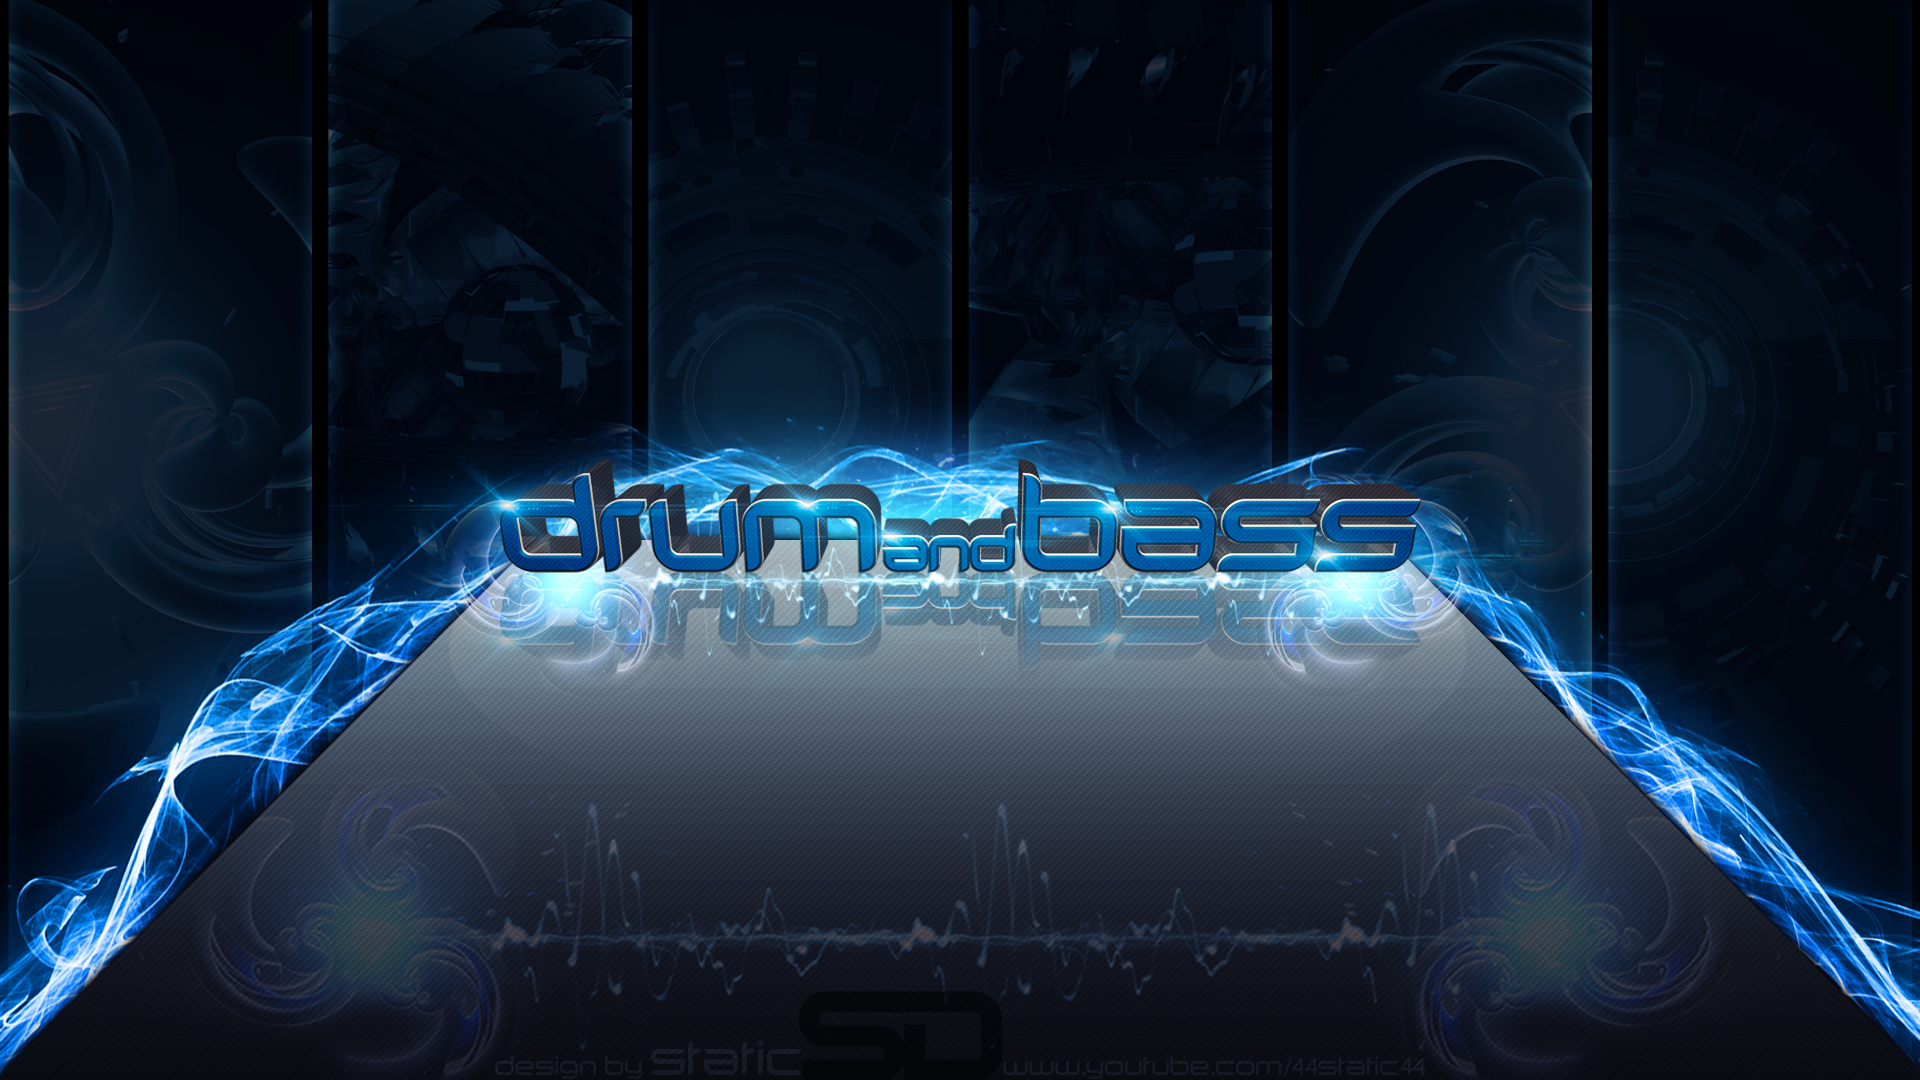 Music Drum And Bass HD Wallpaper | Background Image